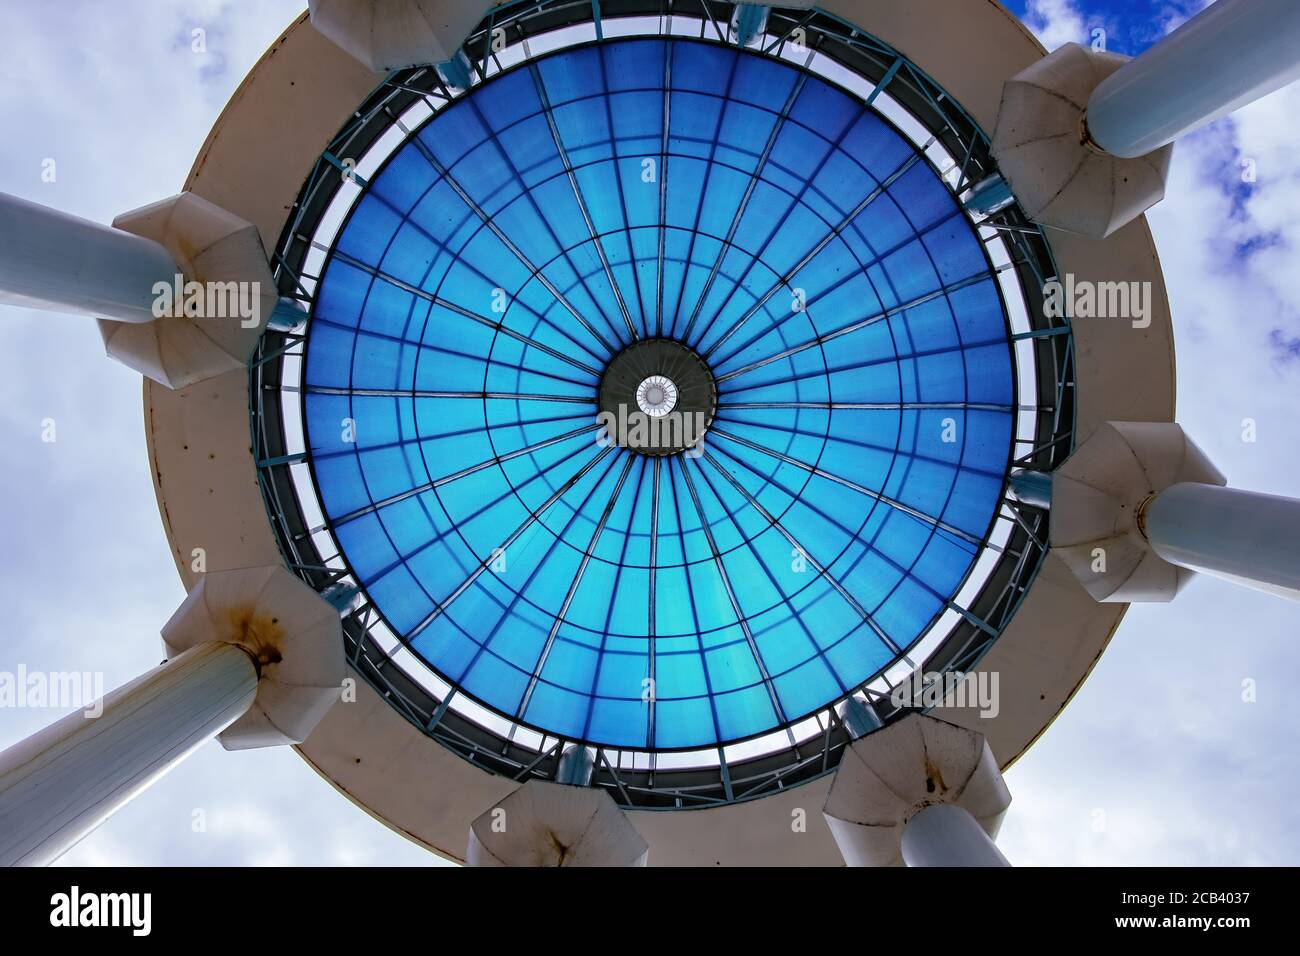 Blue glass transparent dome, bottom view at sunny day Stock Photo